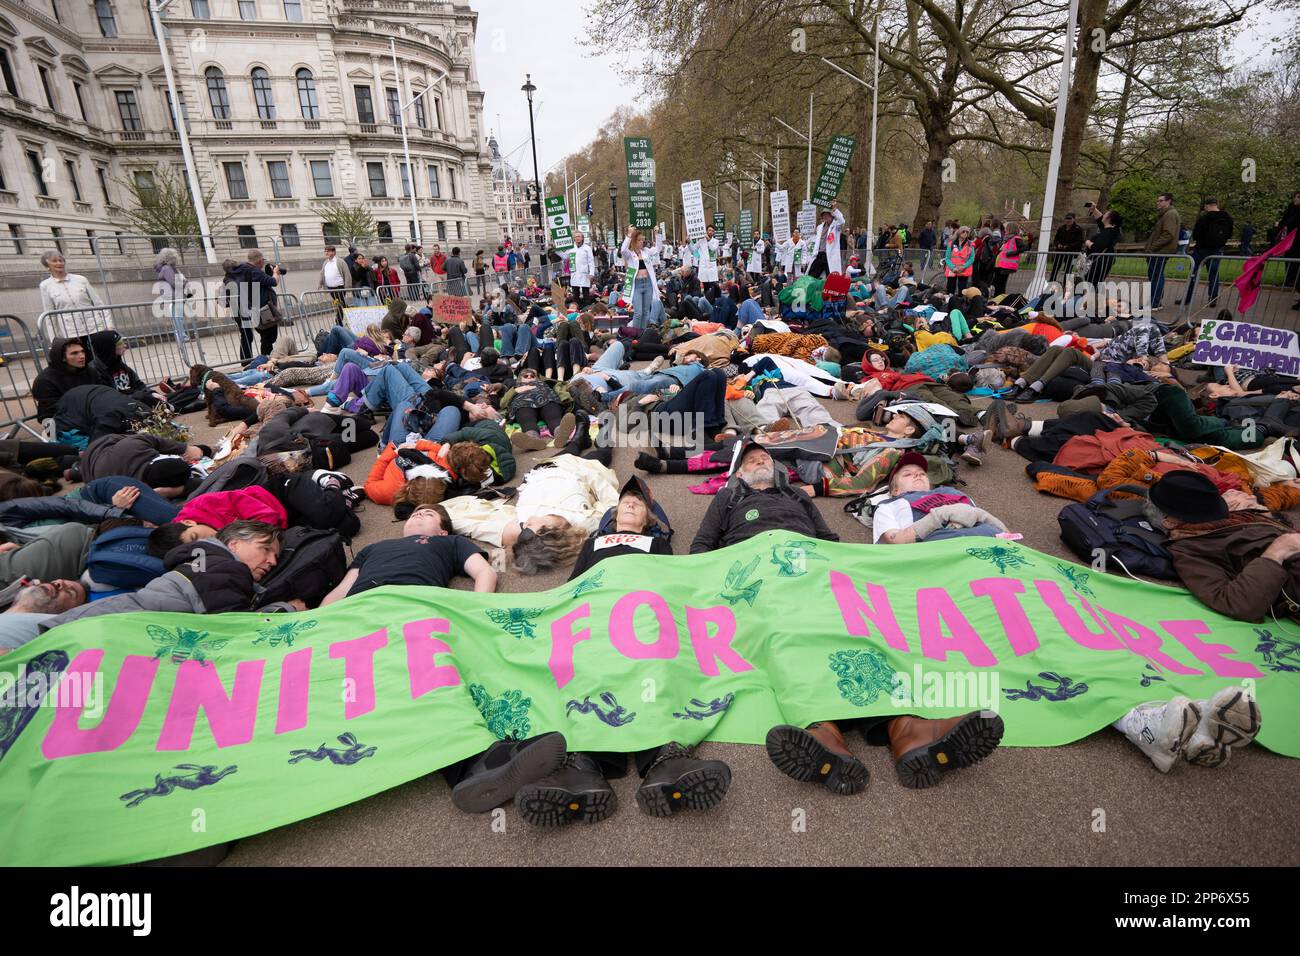 London, UK . 22nd Apr, 2023. The 'die in' at Extinction Rebellion Horse Guards Rd, The Big one, day 2 ,( saturday). Involved the 'Big One march for biodiversity'which ended with a 'die in'. Members of the 'Red Rebel Brigade 'and 'Green spirits' attended, 22 April 2023.London United KIngdom Picture garyroberts/worldwidefeatures.com Credit: GaryRobertsphotography/Alamy Live News Credit: GaryRobertsphotography/Alamy Live News Stock Photo